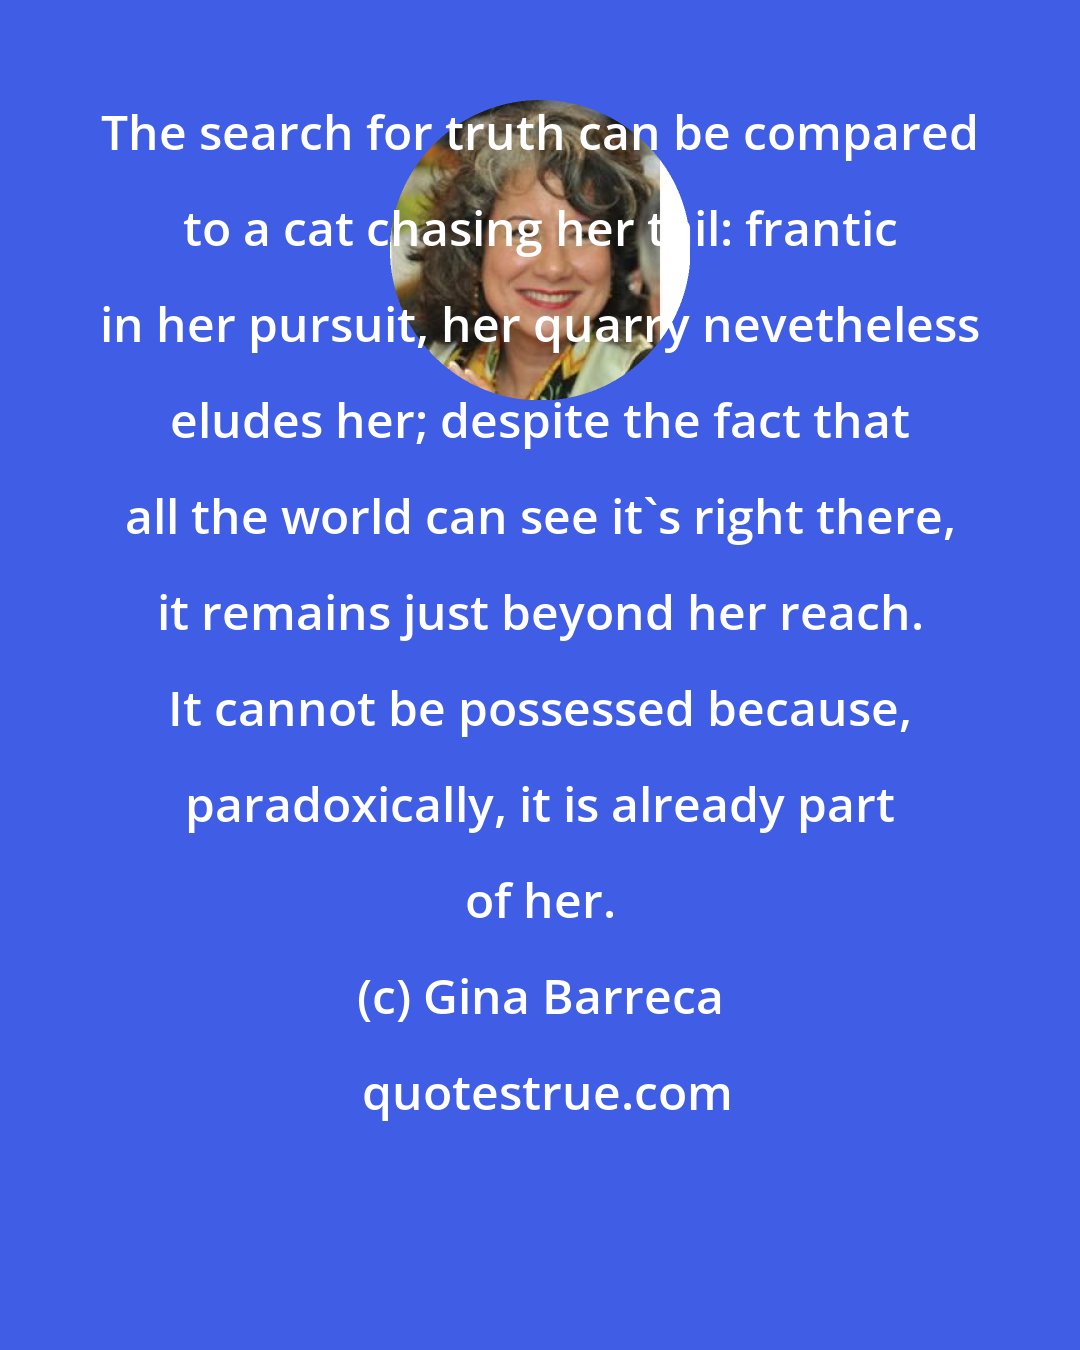 Gina Barreca: The search for truth can be compared to a cat chasing her tail: frantic in her pursuit, her quarry nevetheless eludes her; despite the fact that all the world can see it's right there, it remains just beyond her reach. It cannot be possessed because, paradoxically, it is already part of her.